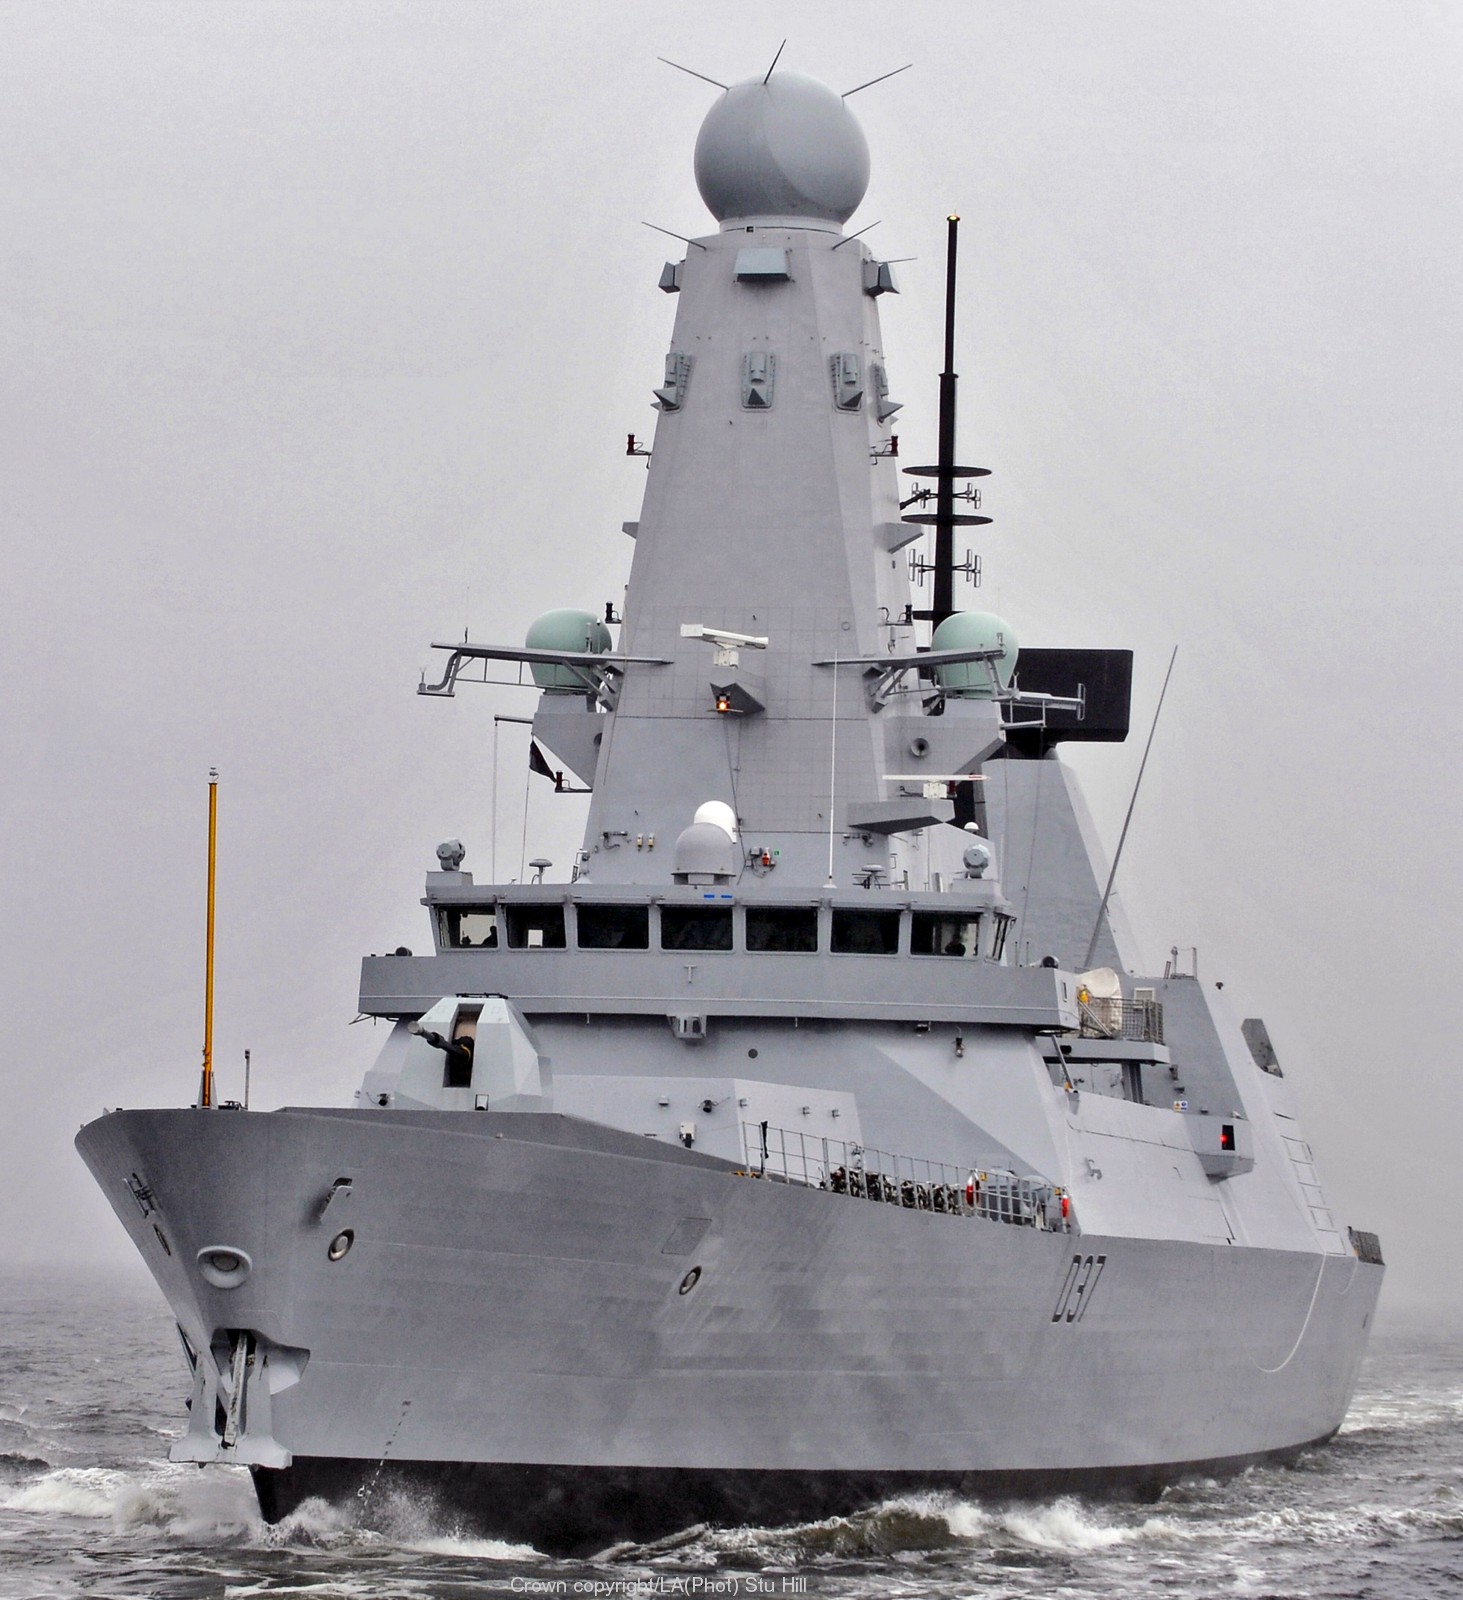 d37 hms duncan d-37 type 45 daring class guided missile destroyer ddg royal navy sea viper 11